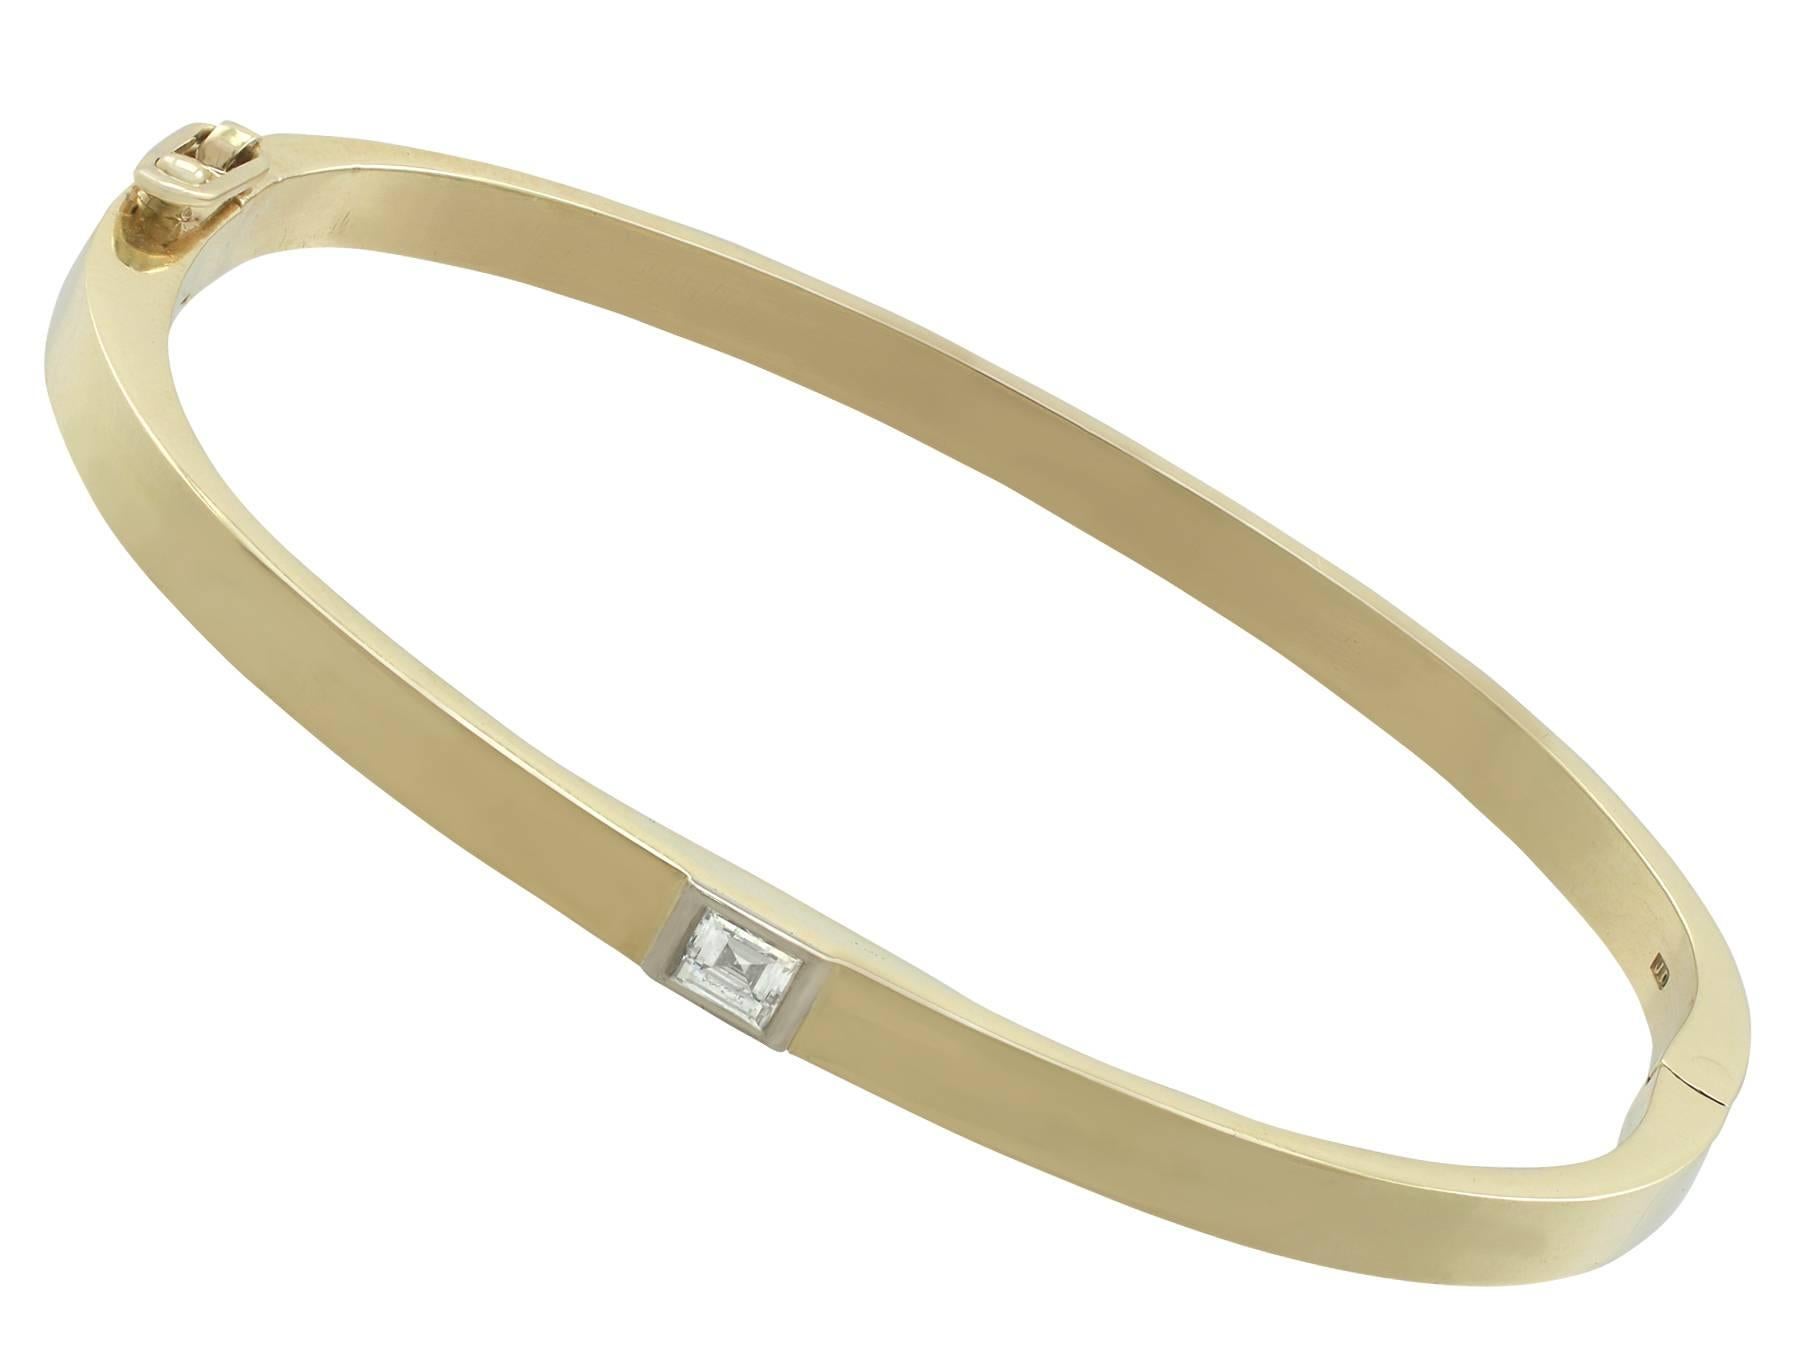 An impressive contemporary English 0.30 carat diamond and 18 karat yellow gold, 18 karat white gold set bangle; part of our diverse diamond jewelry collections.

This fine and impressive single single bangle has been crafted in 18kt yellow gold with